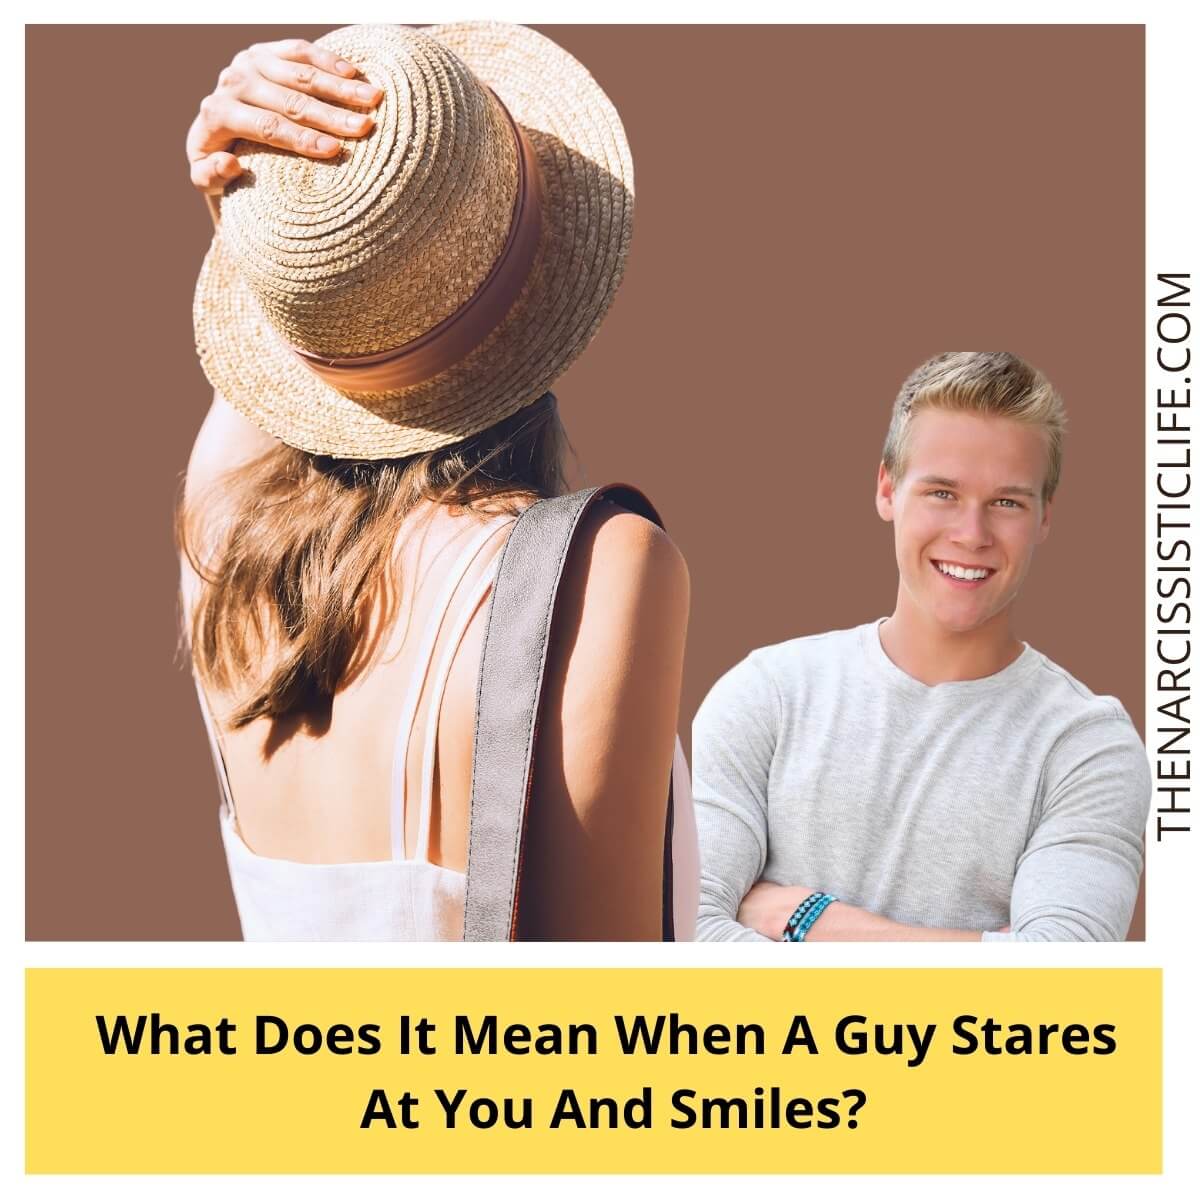 What does it mean if a guy stares at you but looks away?